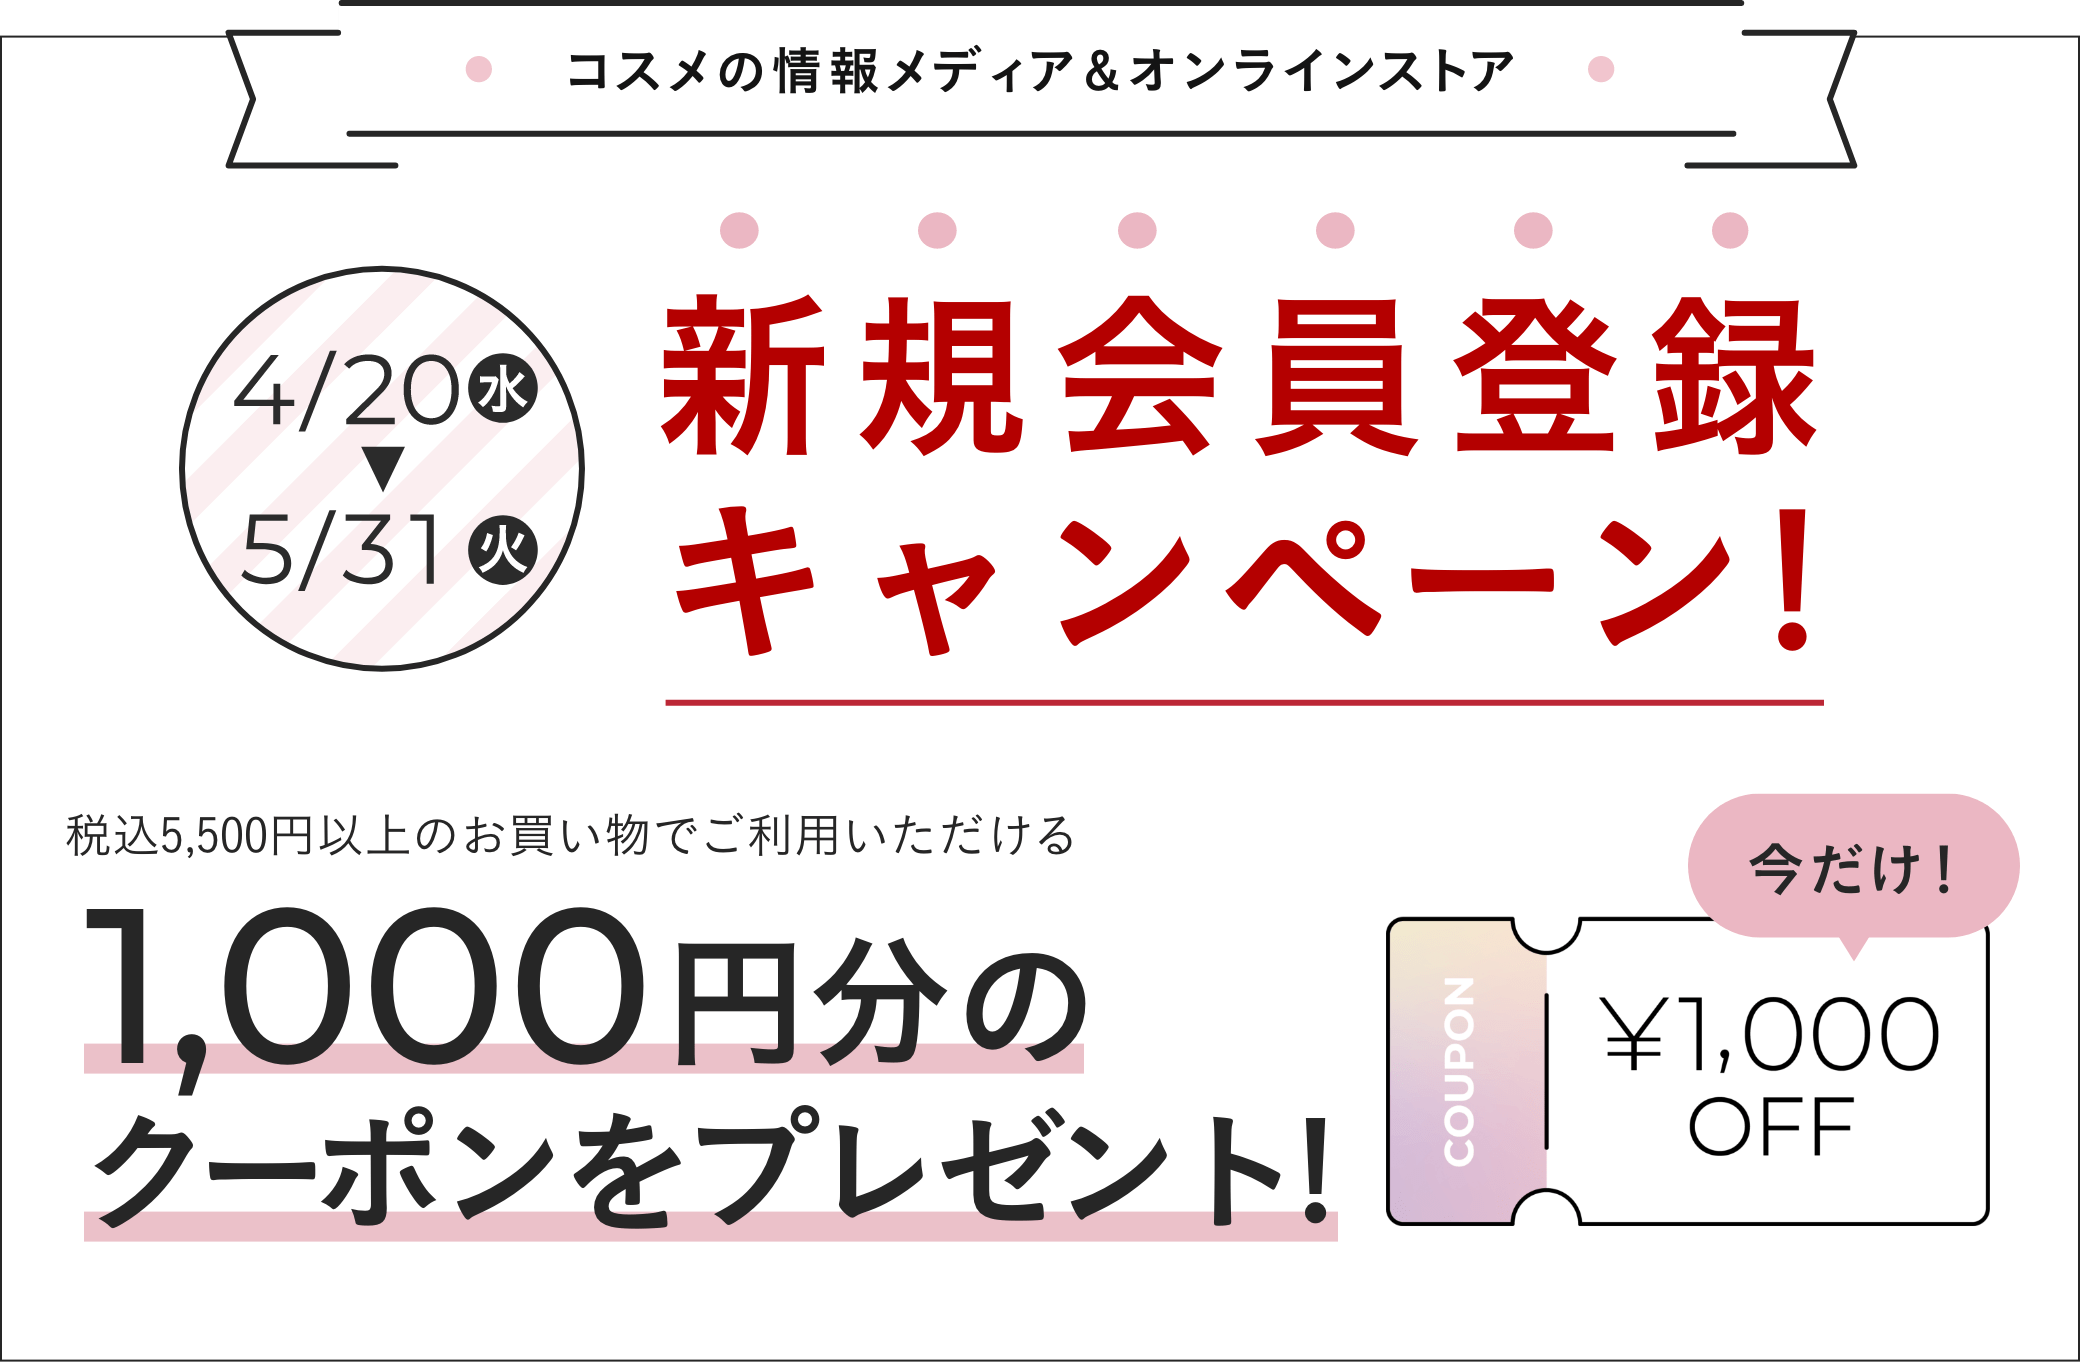 DEPACO新規会員登録キャンペーン!